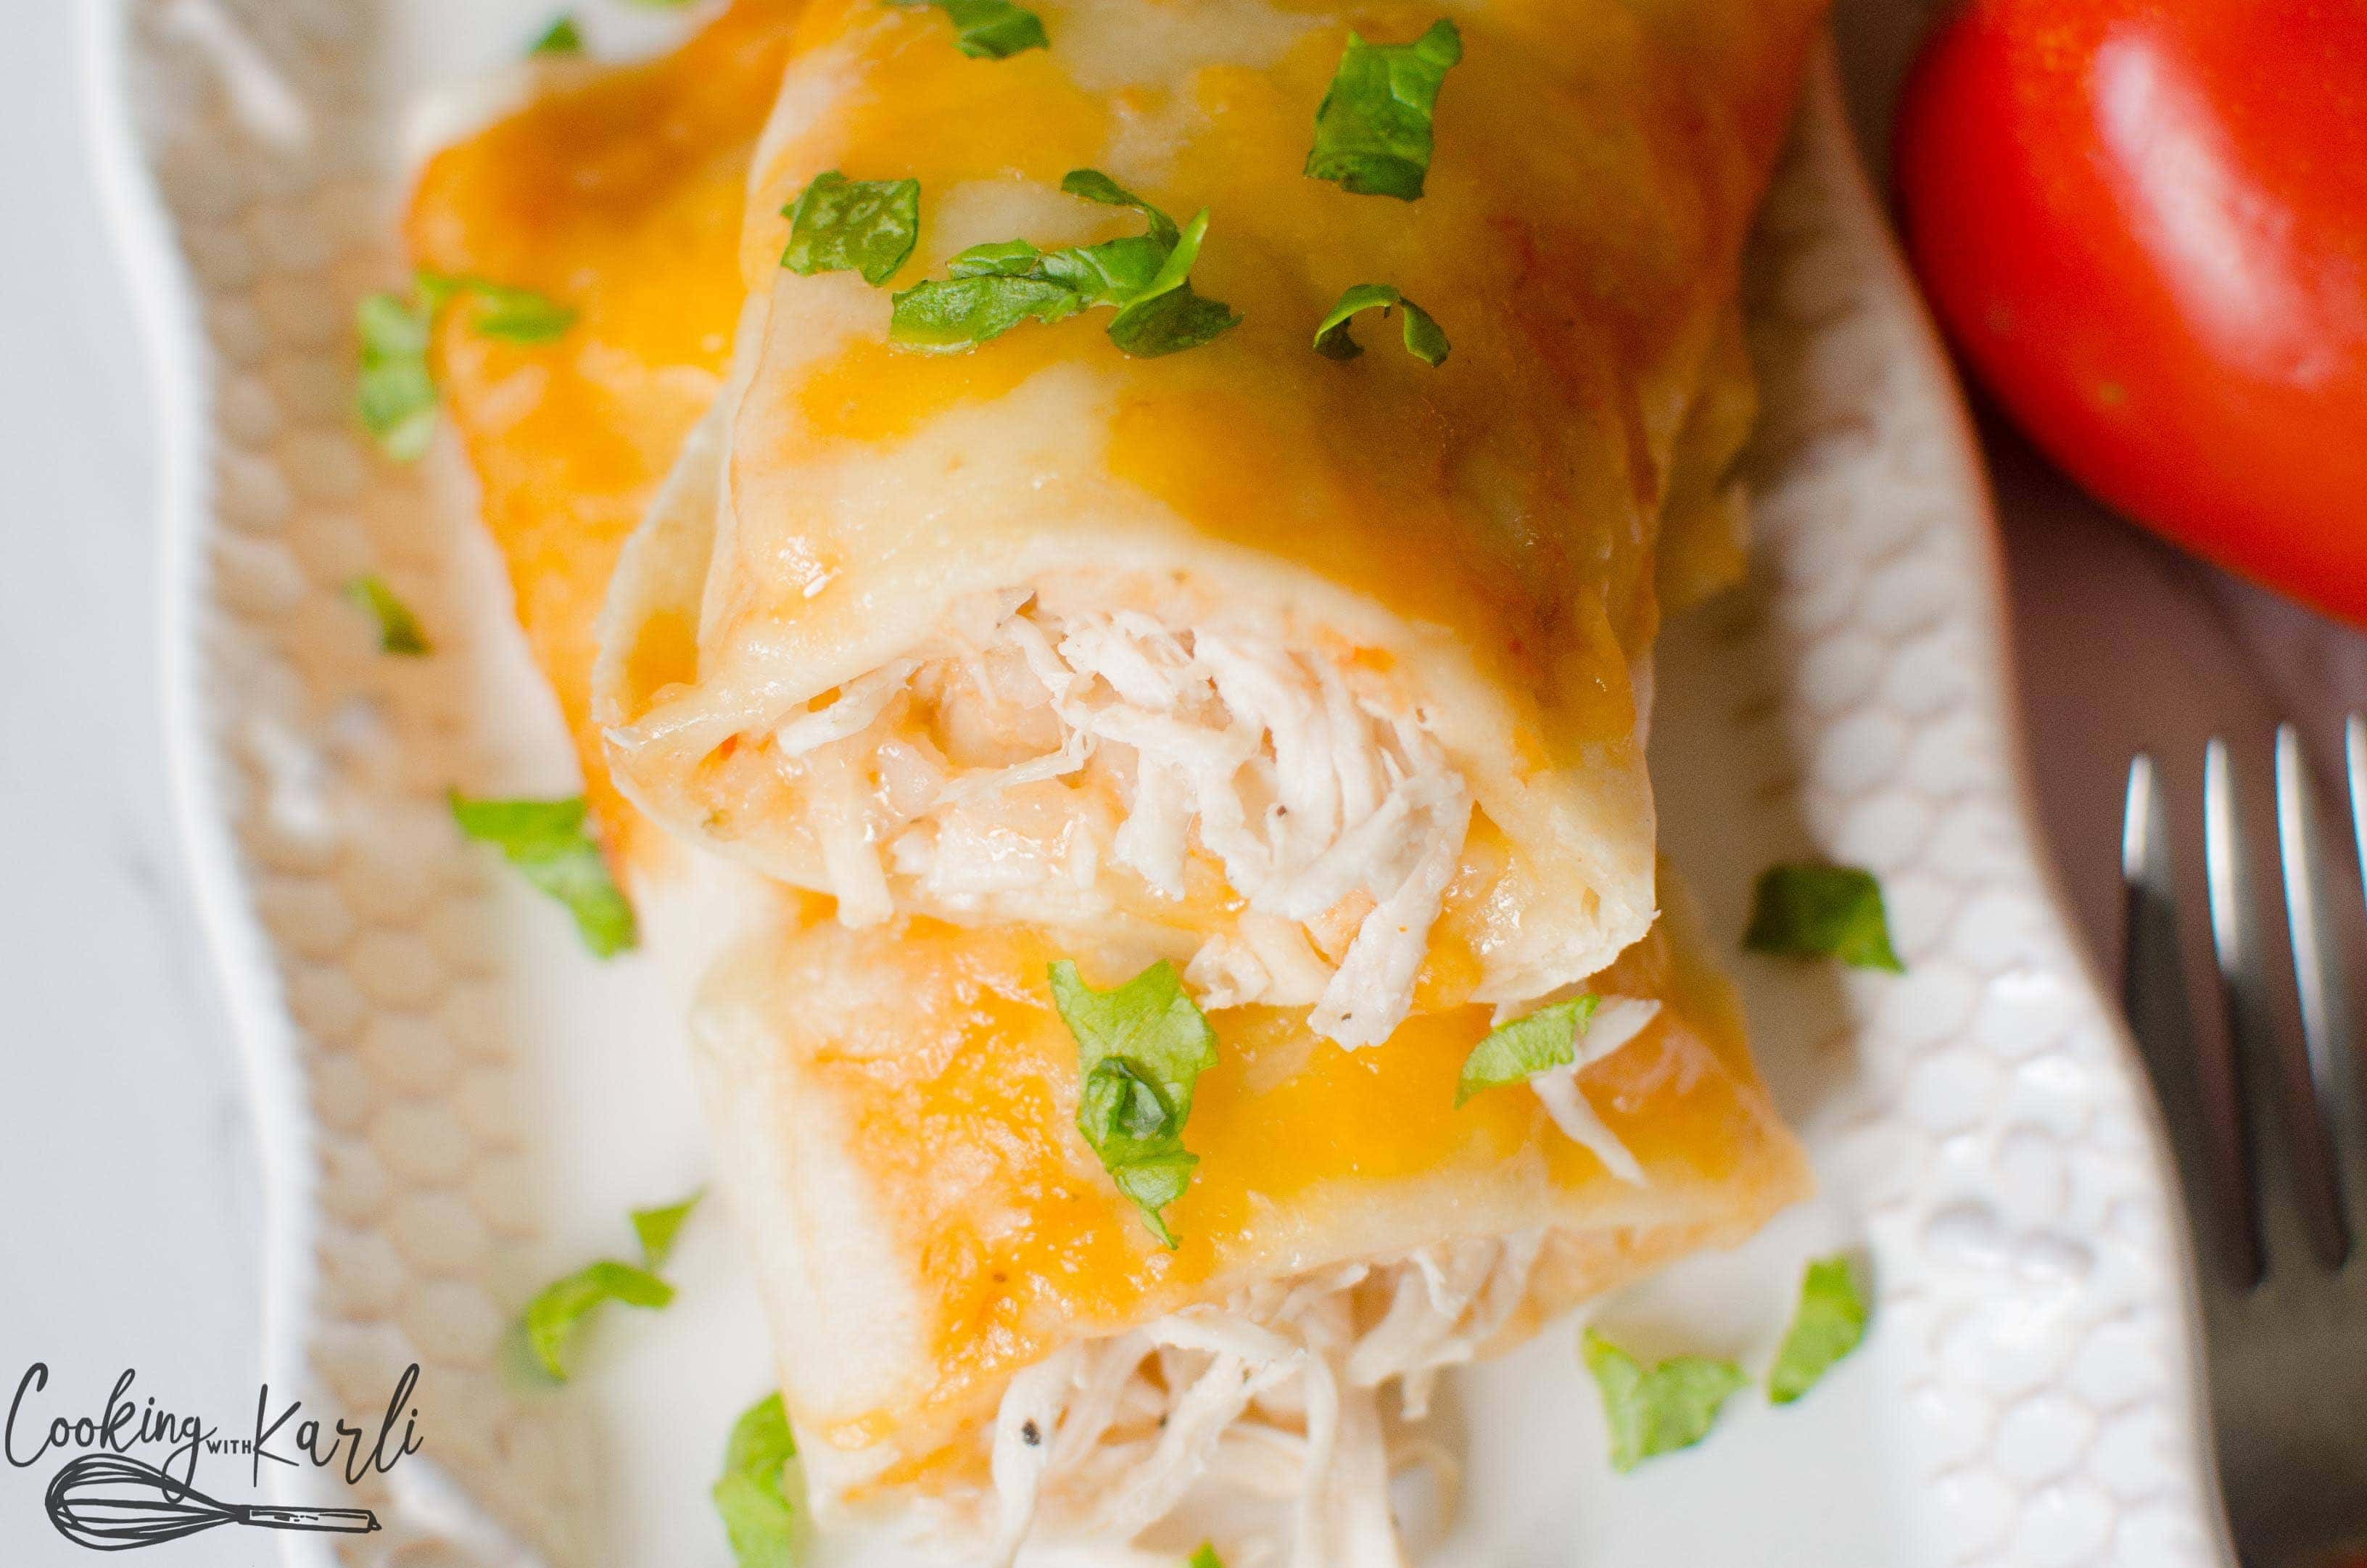 Chicken and Rice Enchiladas made with an easy salsa sauce.